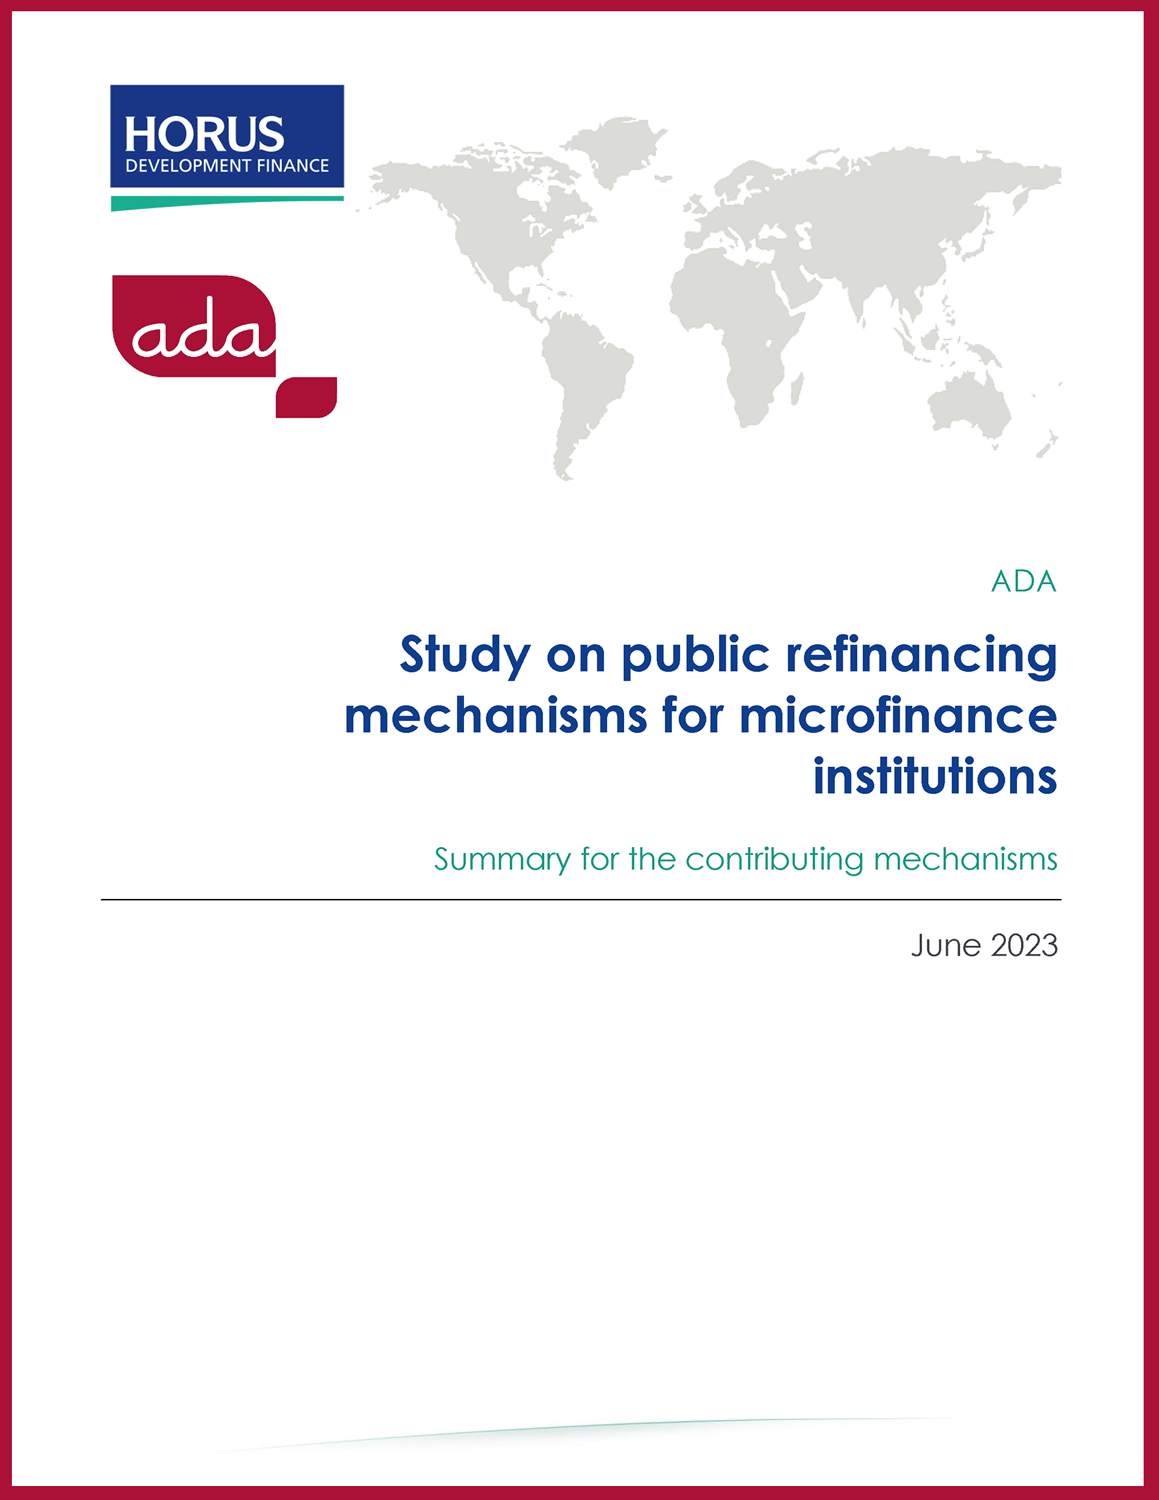 Study on public refinancing mechanisms for microfinance institutions